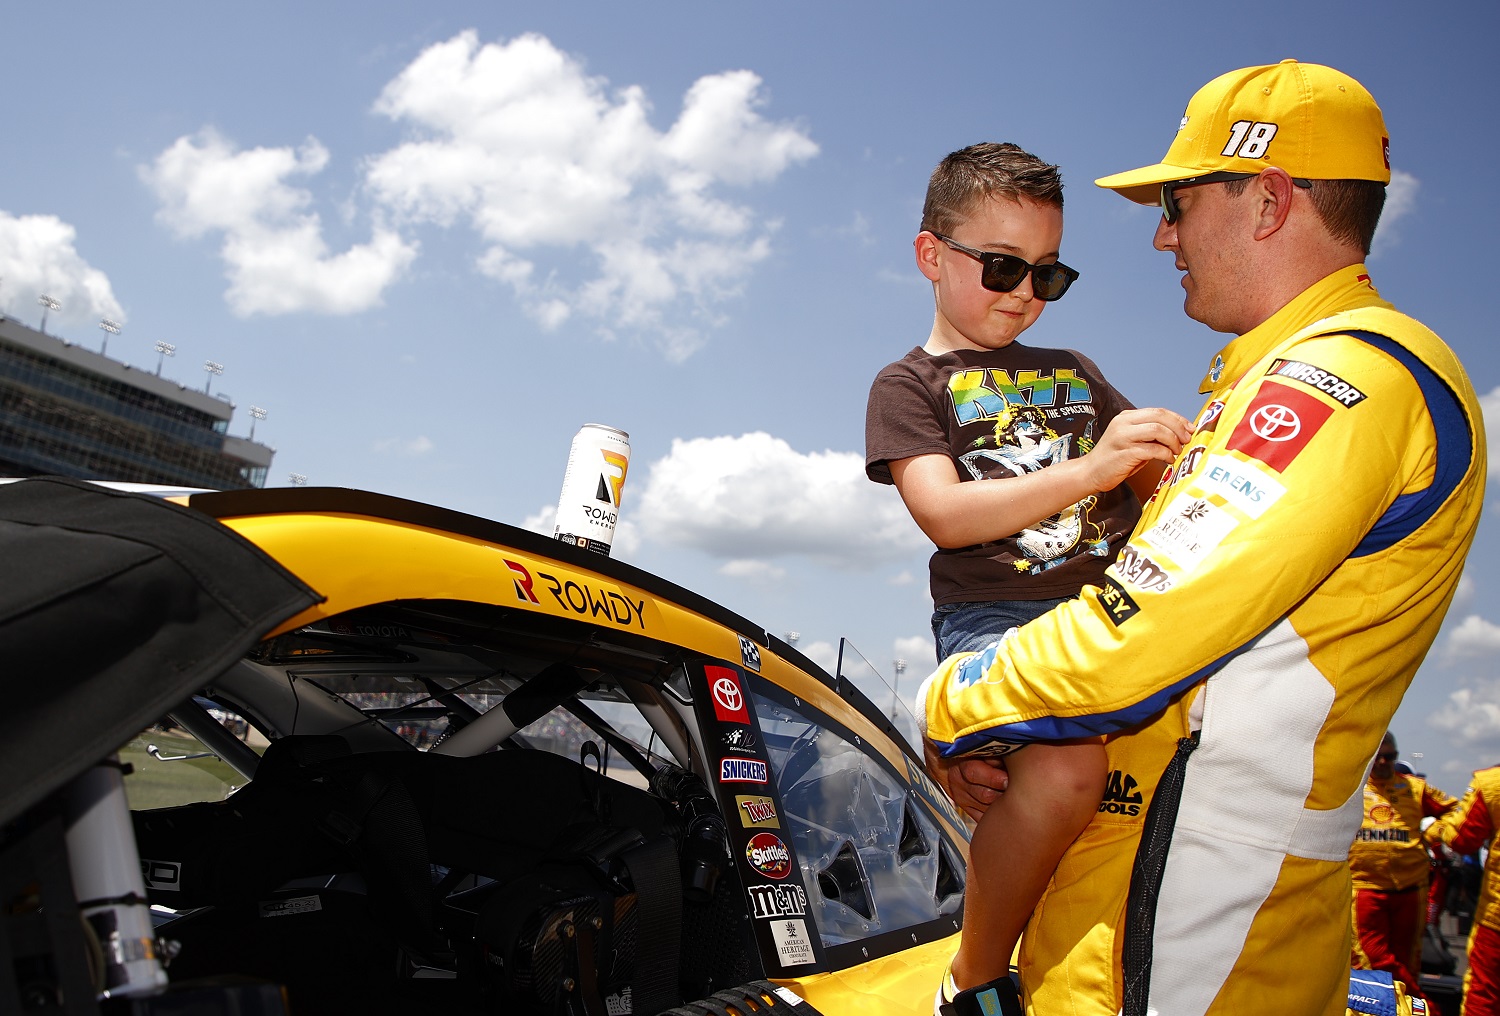 Kyle Busch, driver of the No. 18 Toyota, spends time with son Brexton prior to the NASCAR Cup Series Ally 400 at Nashville Superspeedway on June 20, 2021.